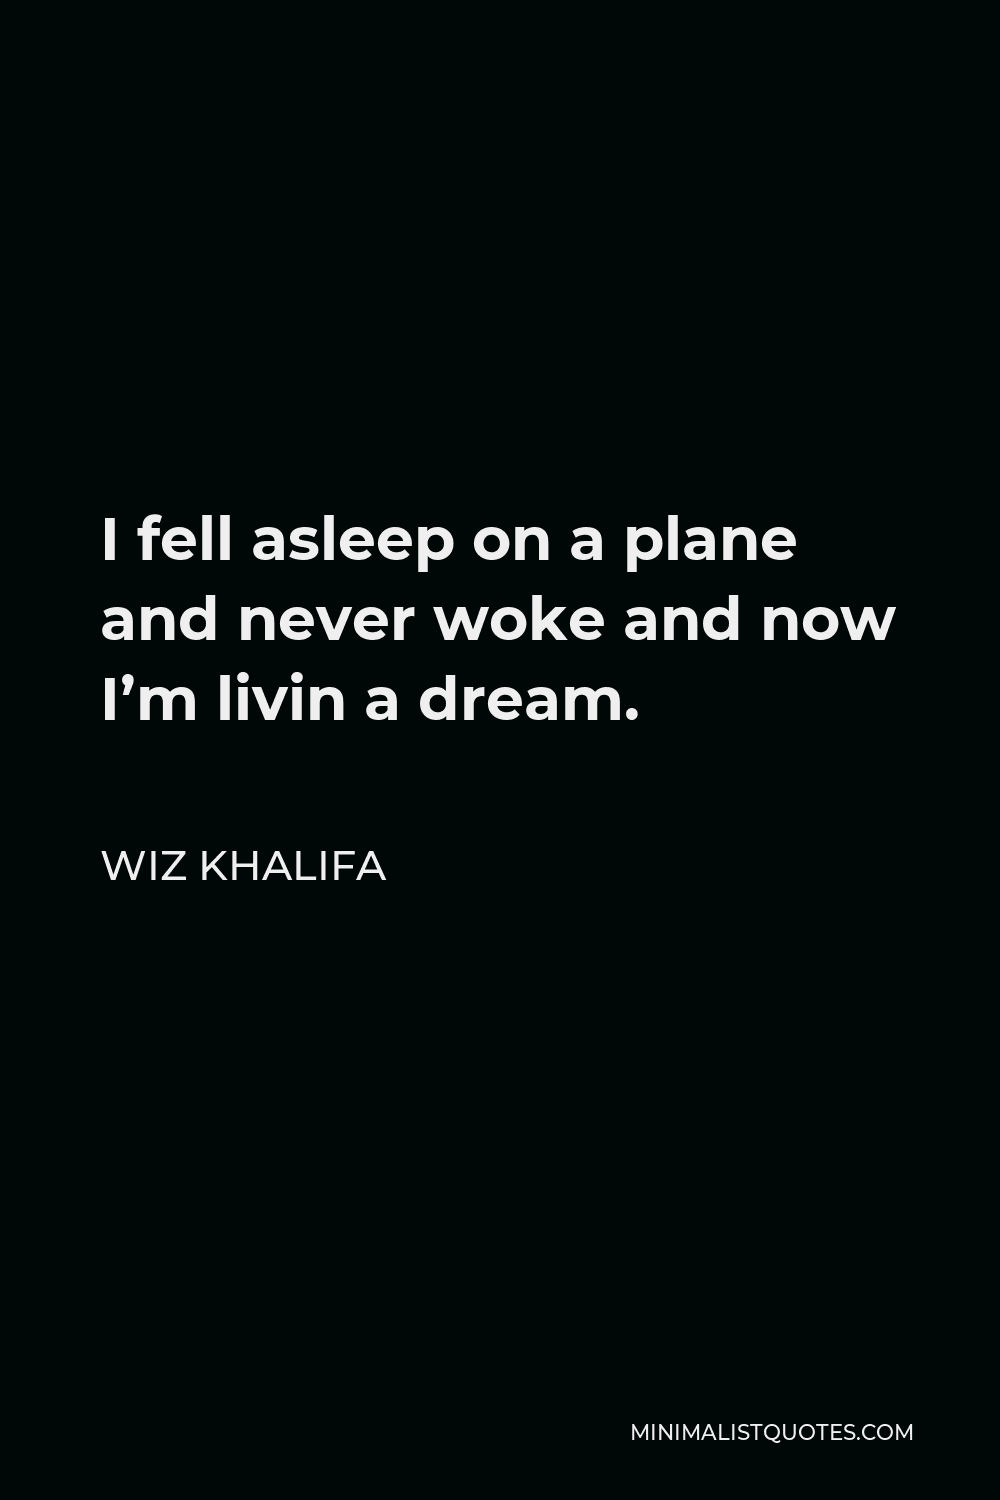 Wiz Khalifa Quote - I fell asleep on a plane and never woke and now I’m livin a dream.